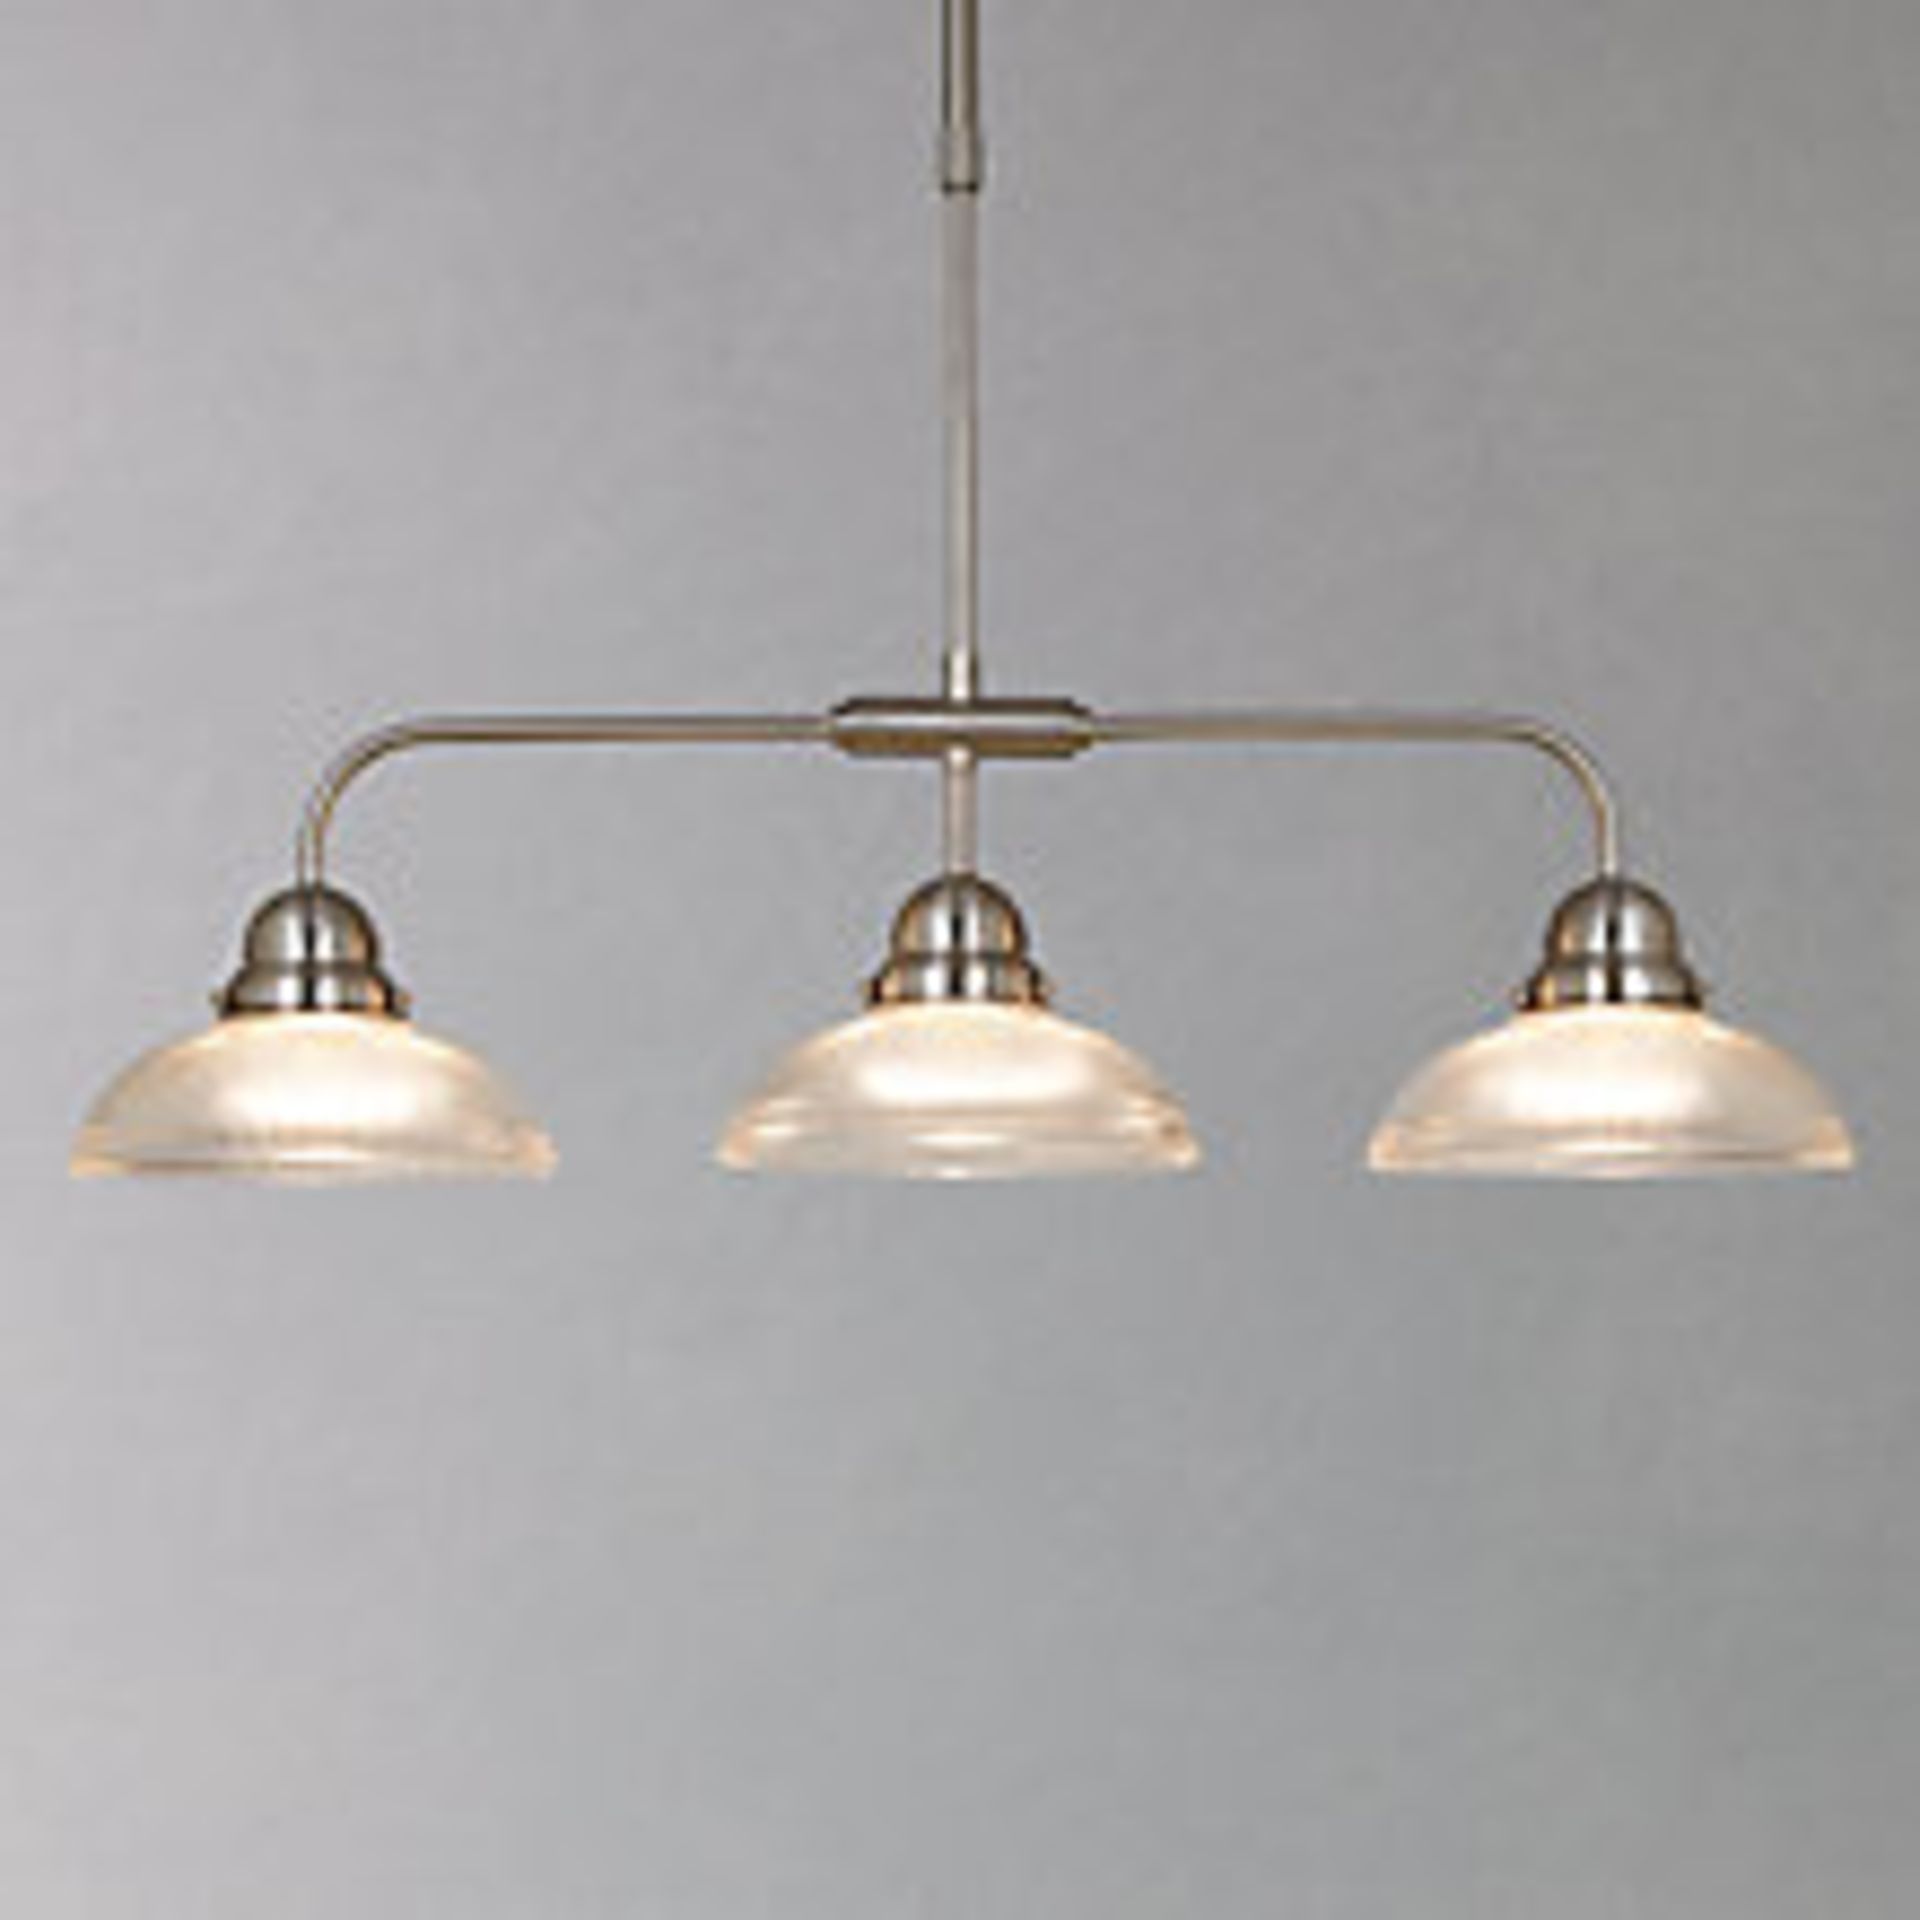 1 x BOXED GEORGE 3 LIGHT CEILING PENDANT (22.4.16) *PLEASE NOTE THAT THE BID PRICE IS MULTIPLIED